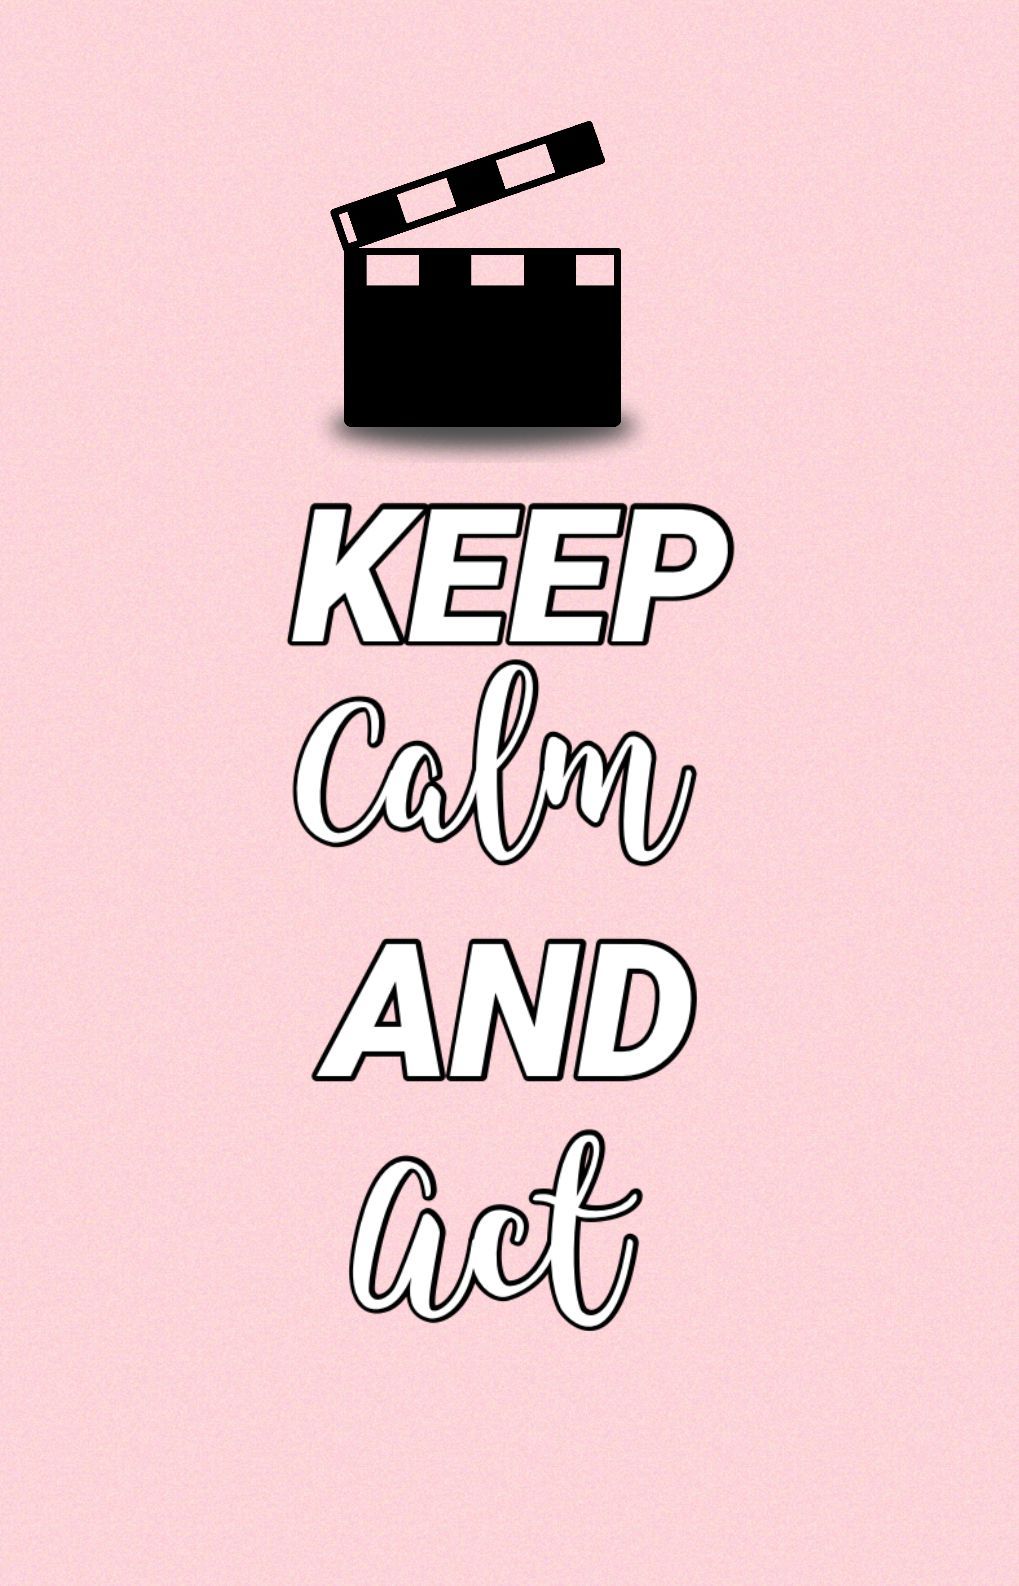 Keep Calm And Act Phone Wallpaper Background. Phone Wallpaper